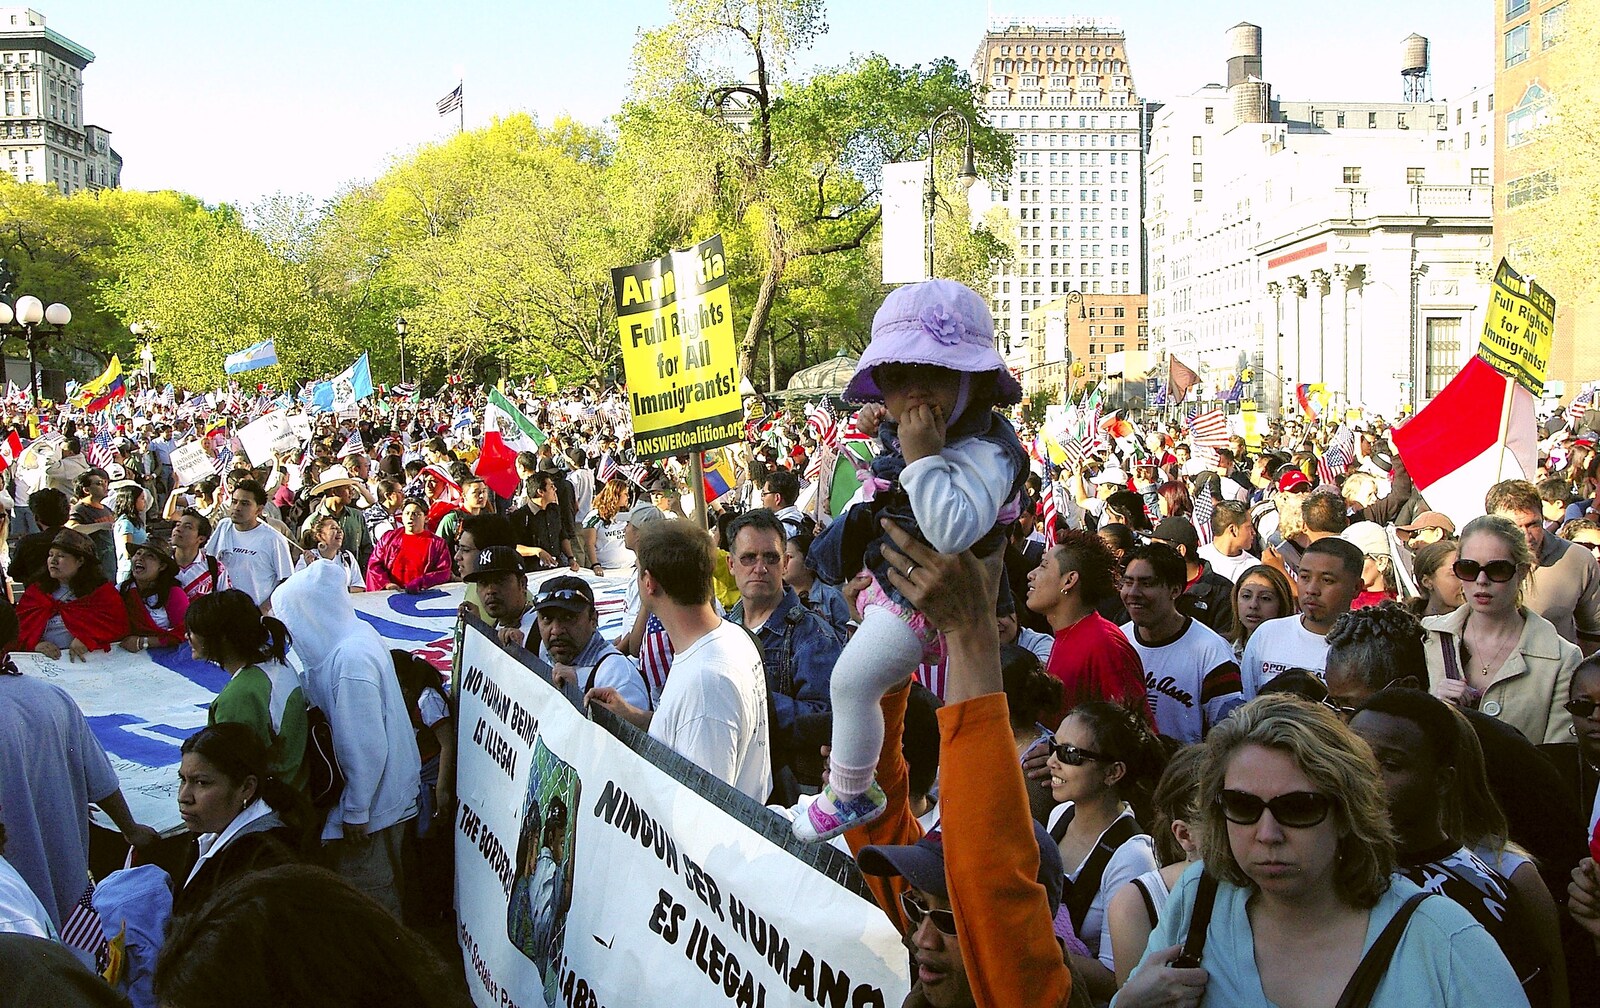 A baby is waved around from A Union Square Demo, Bryant Park and Columbus Circle, New York, US - 2nd May 2006